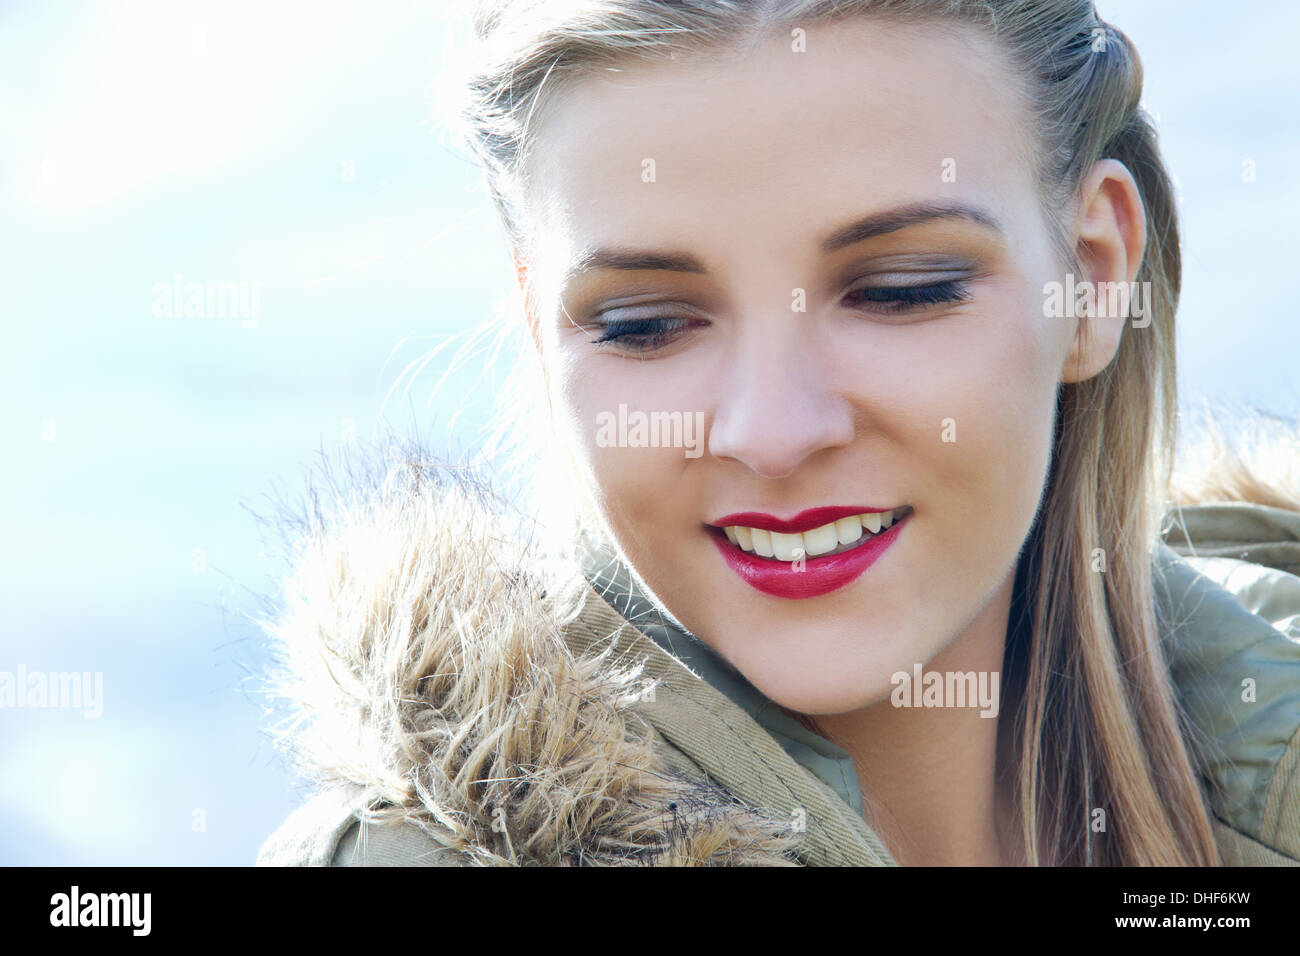 Close up portrait of young woman in parka Stock Photo